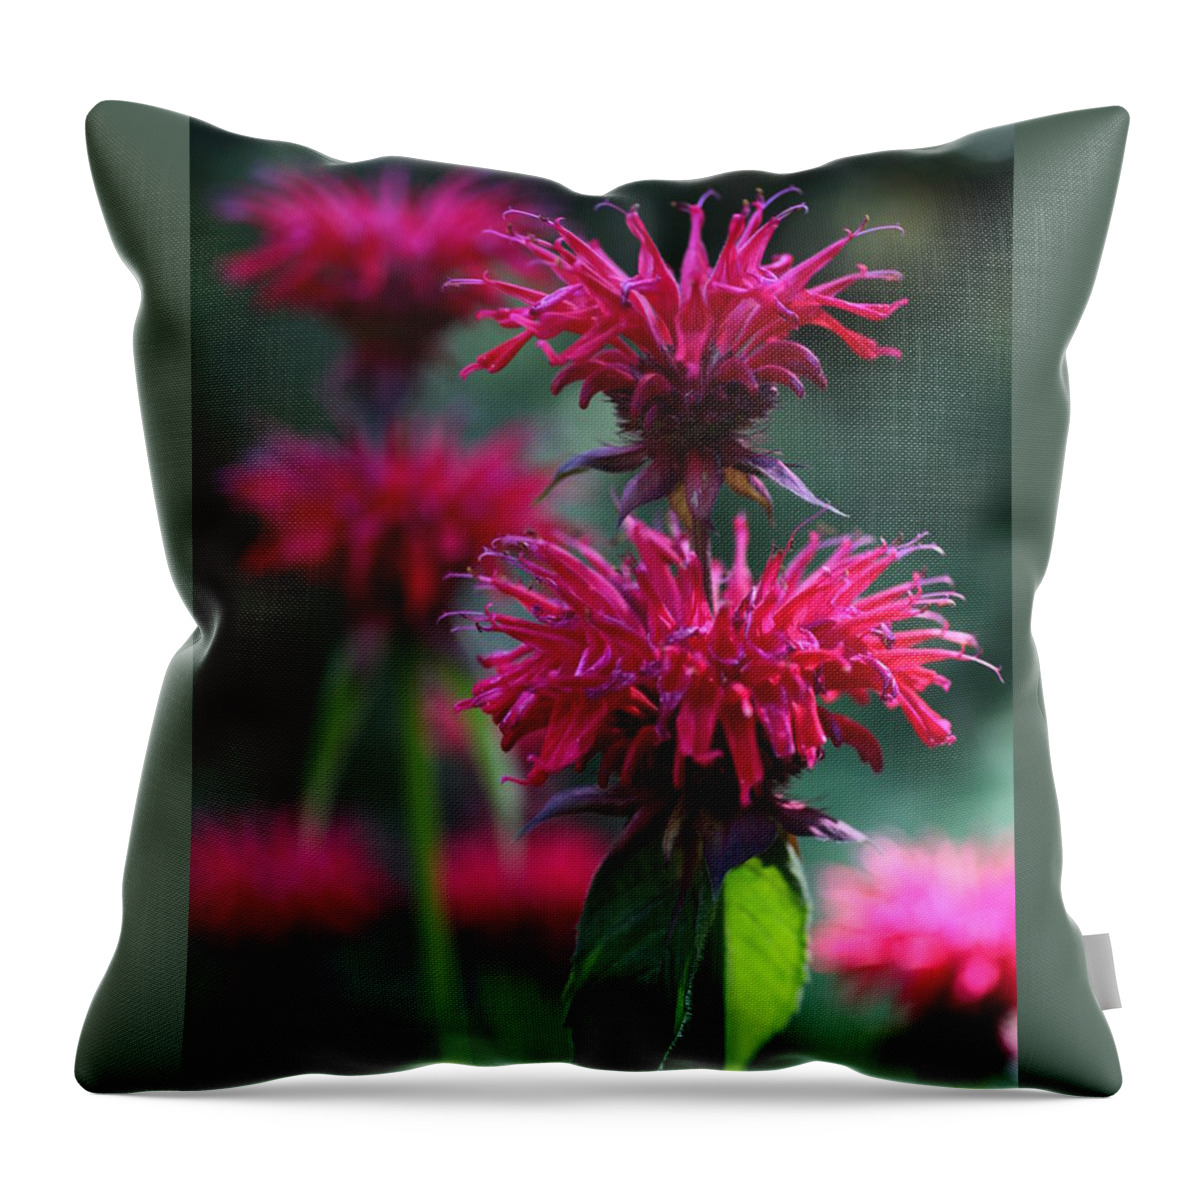 Flower Throw Pillow featuring the photograph Bee Balm Monarda by Tammy Pool